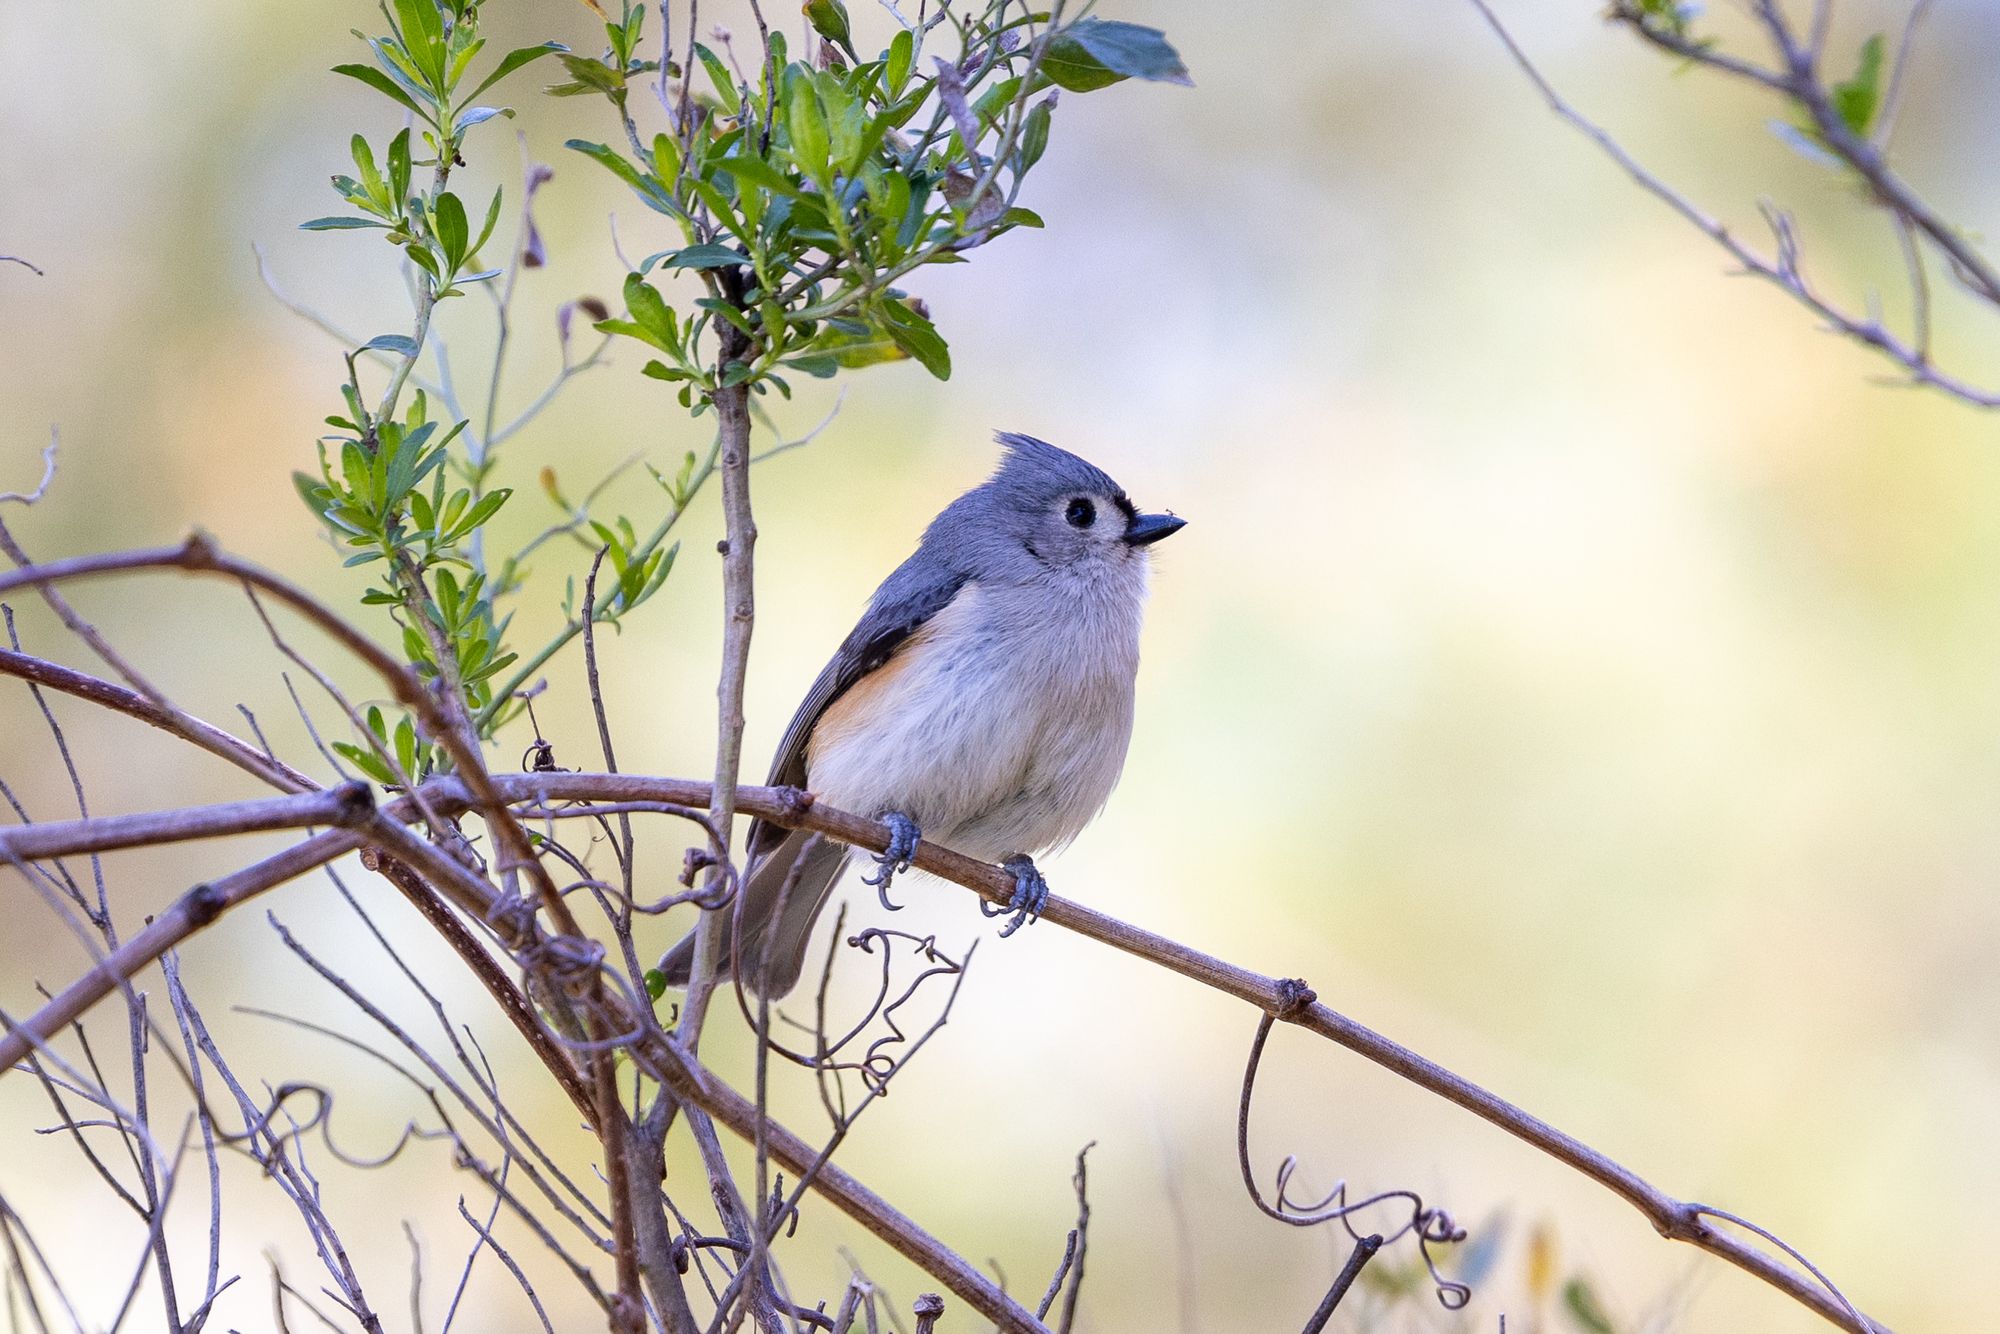 Grey tufted titmouse bird sitting on a small branch.  The background has a smooth blur, which helps to isolate the subject.